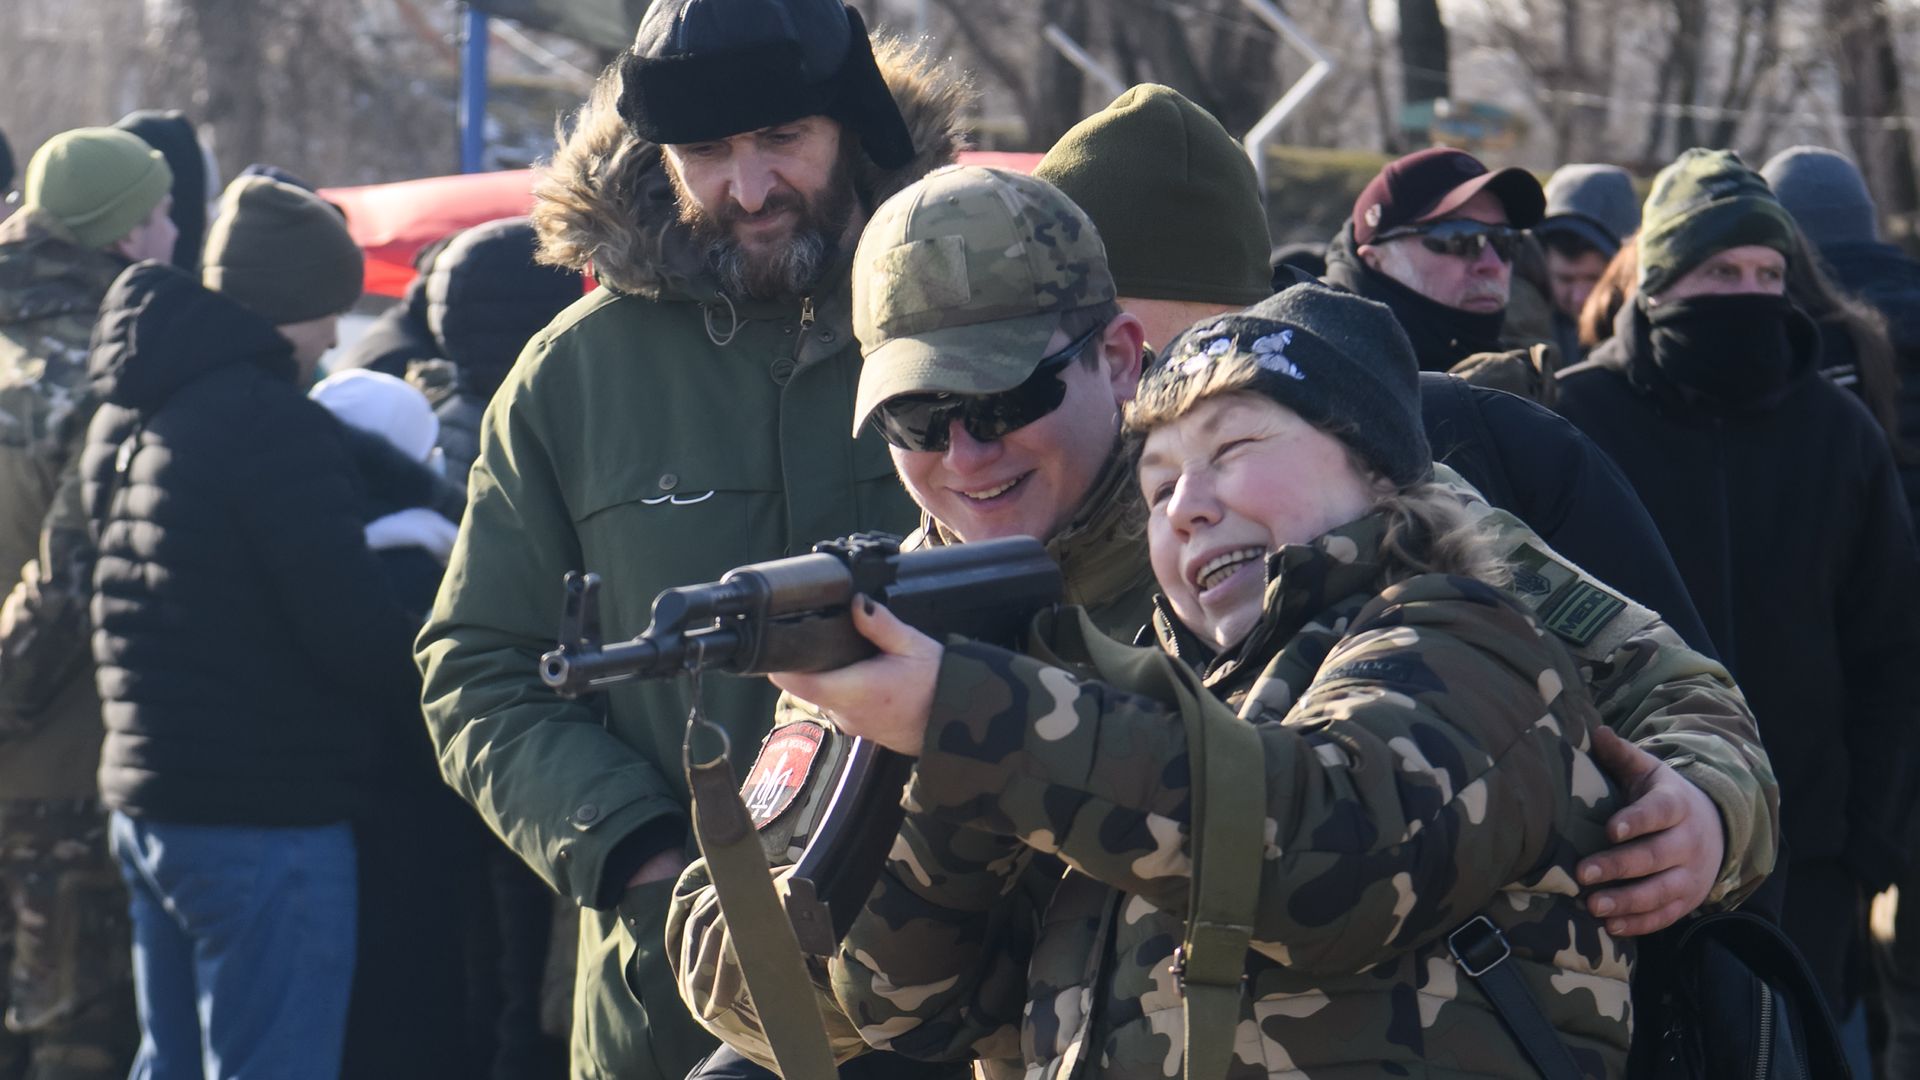 Citizens of Kyiv are seen training with guns in preparation for a possible Russian invasion.